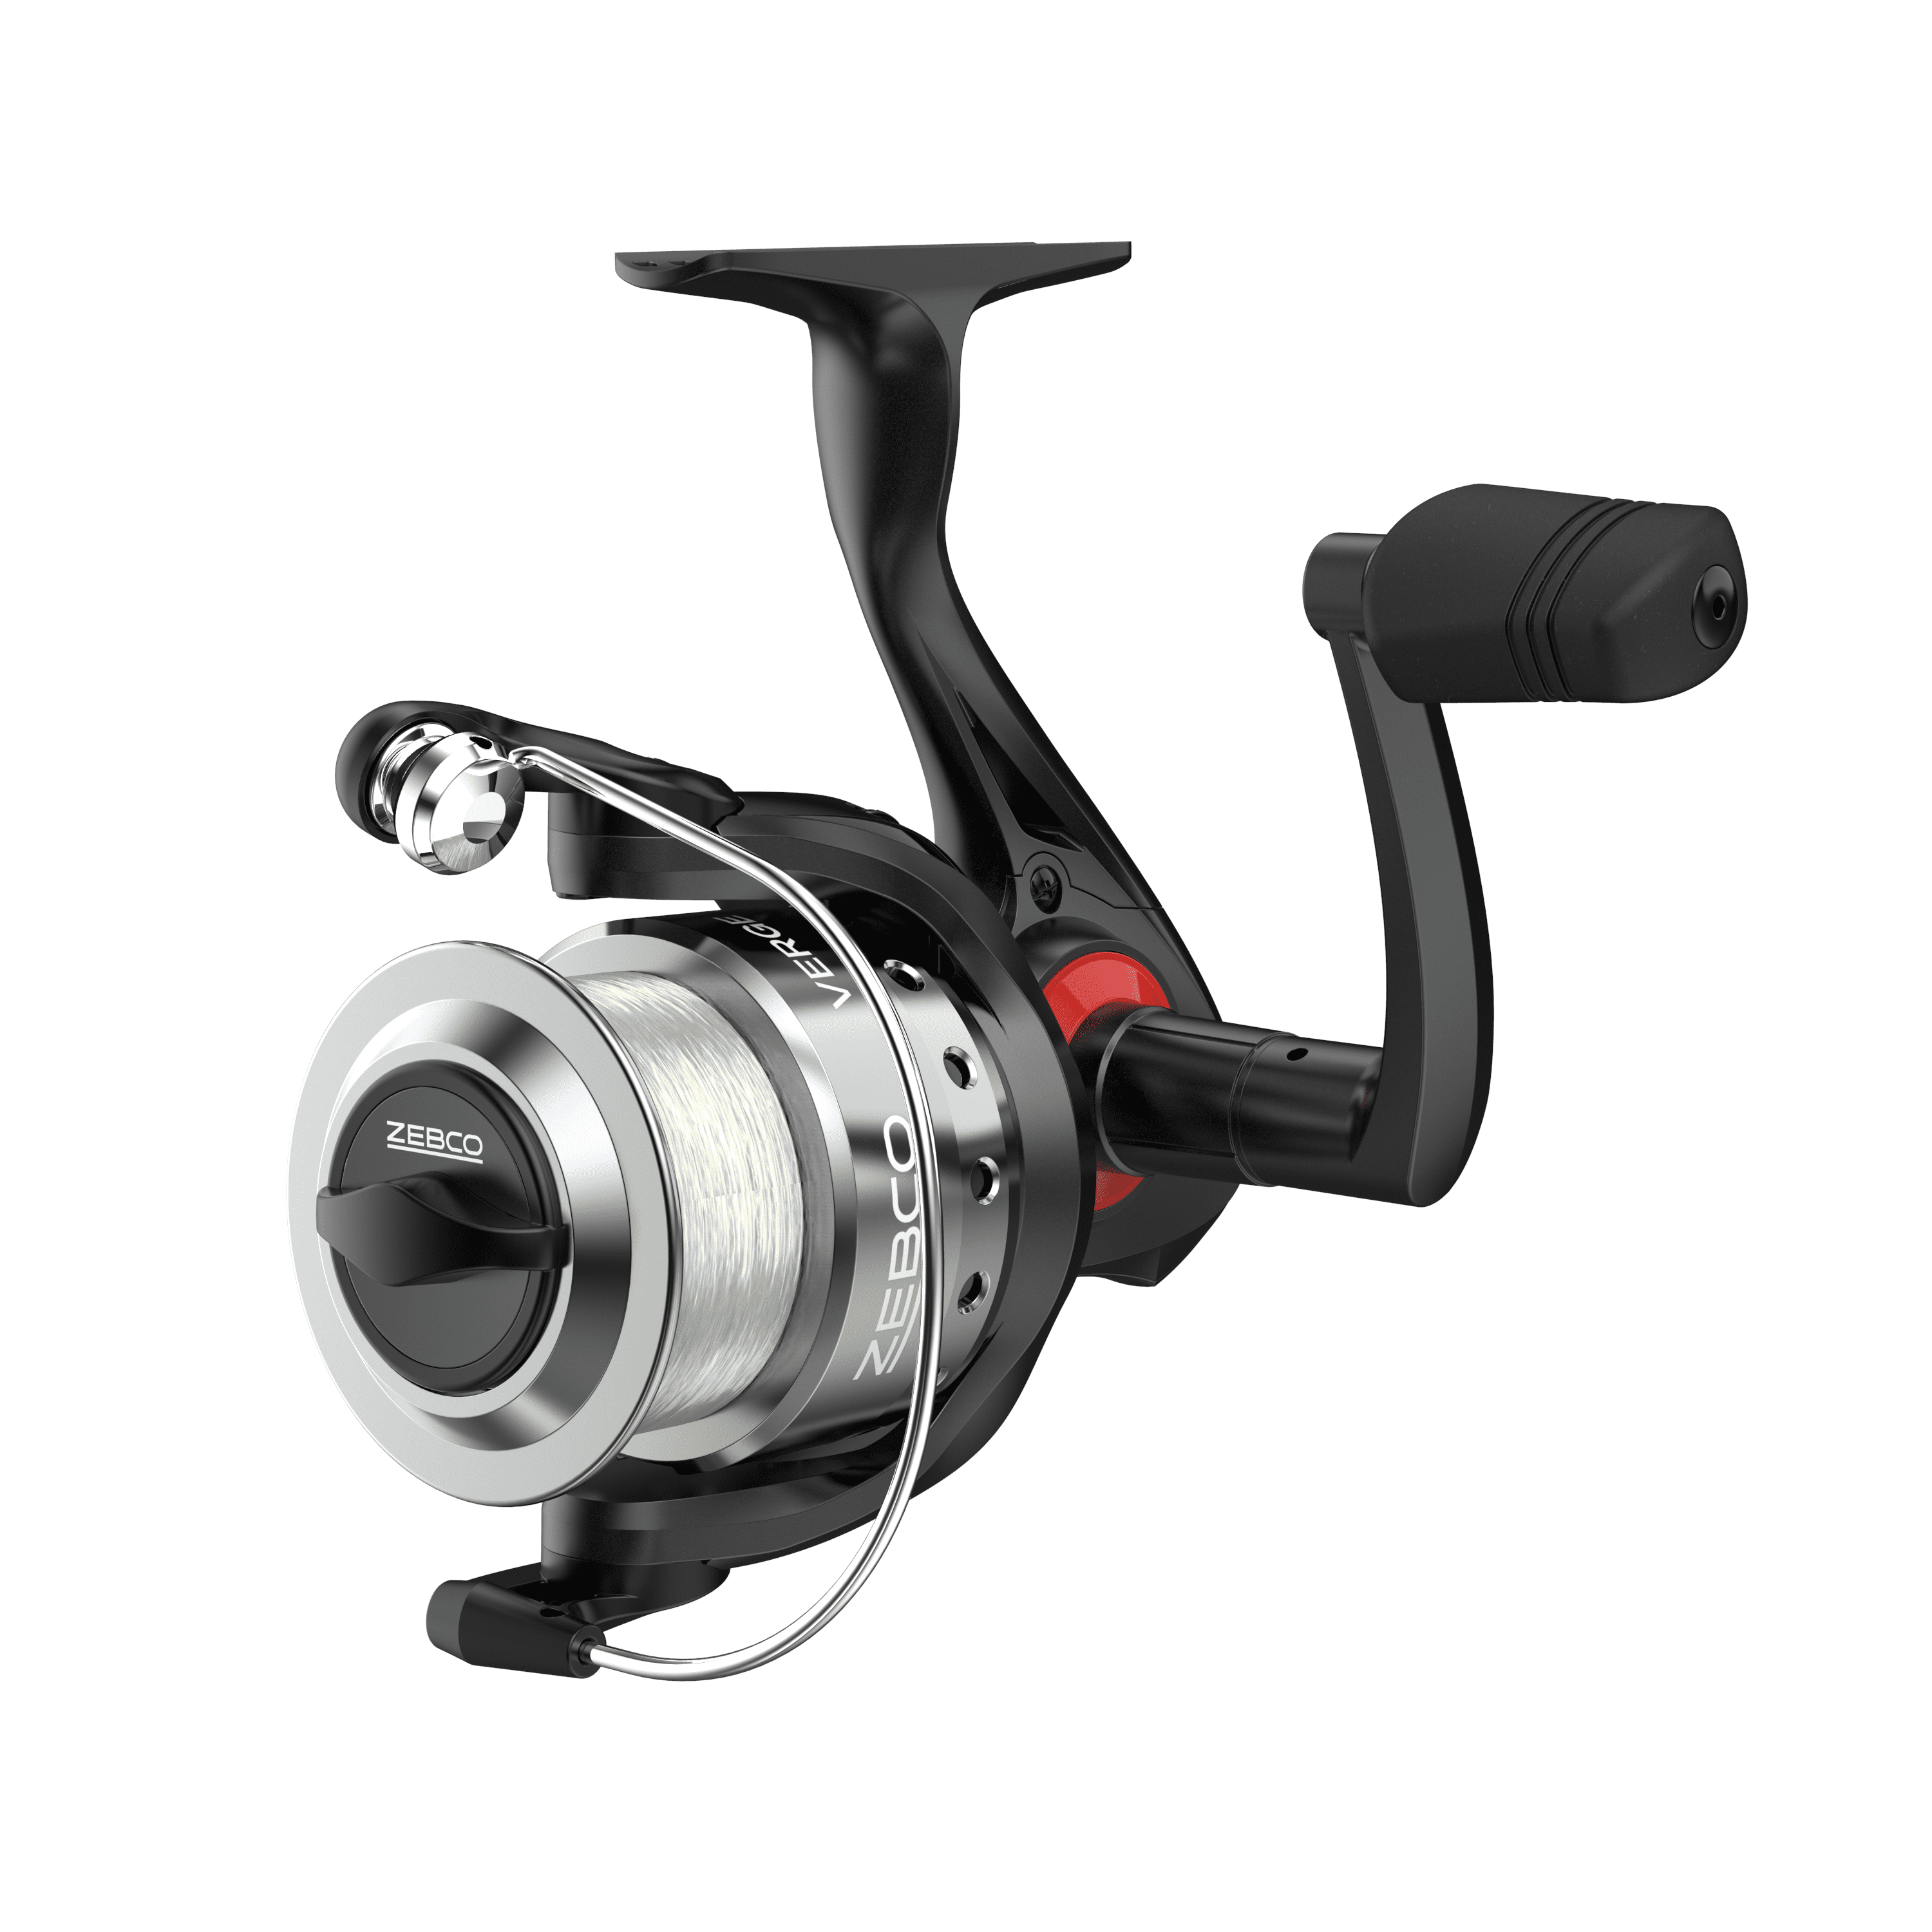 Zebco - If only reels could talk! We can't get over how well the